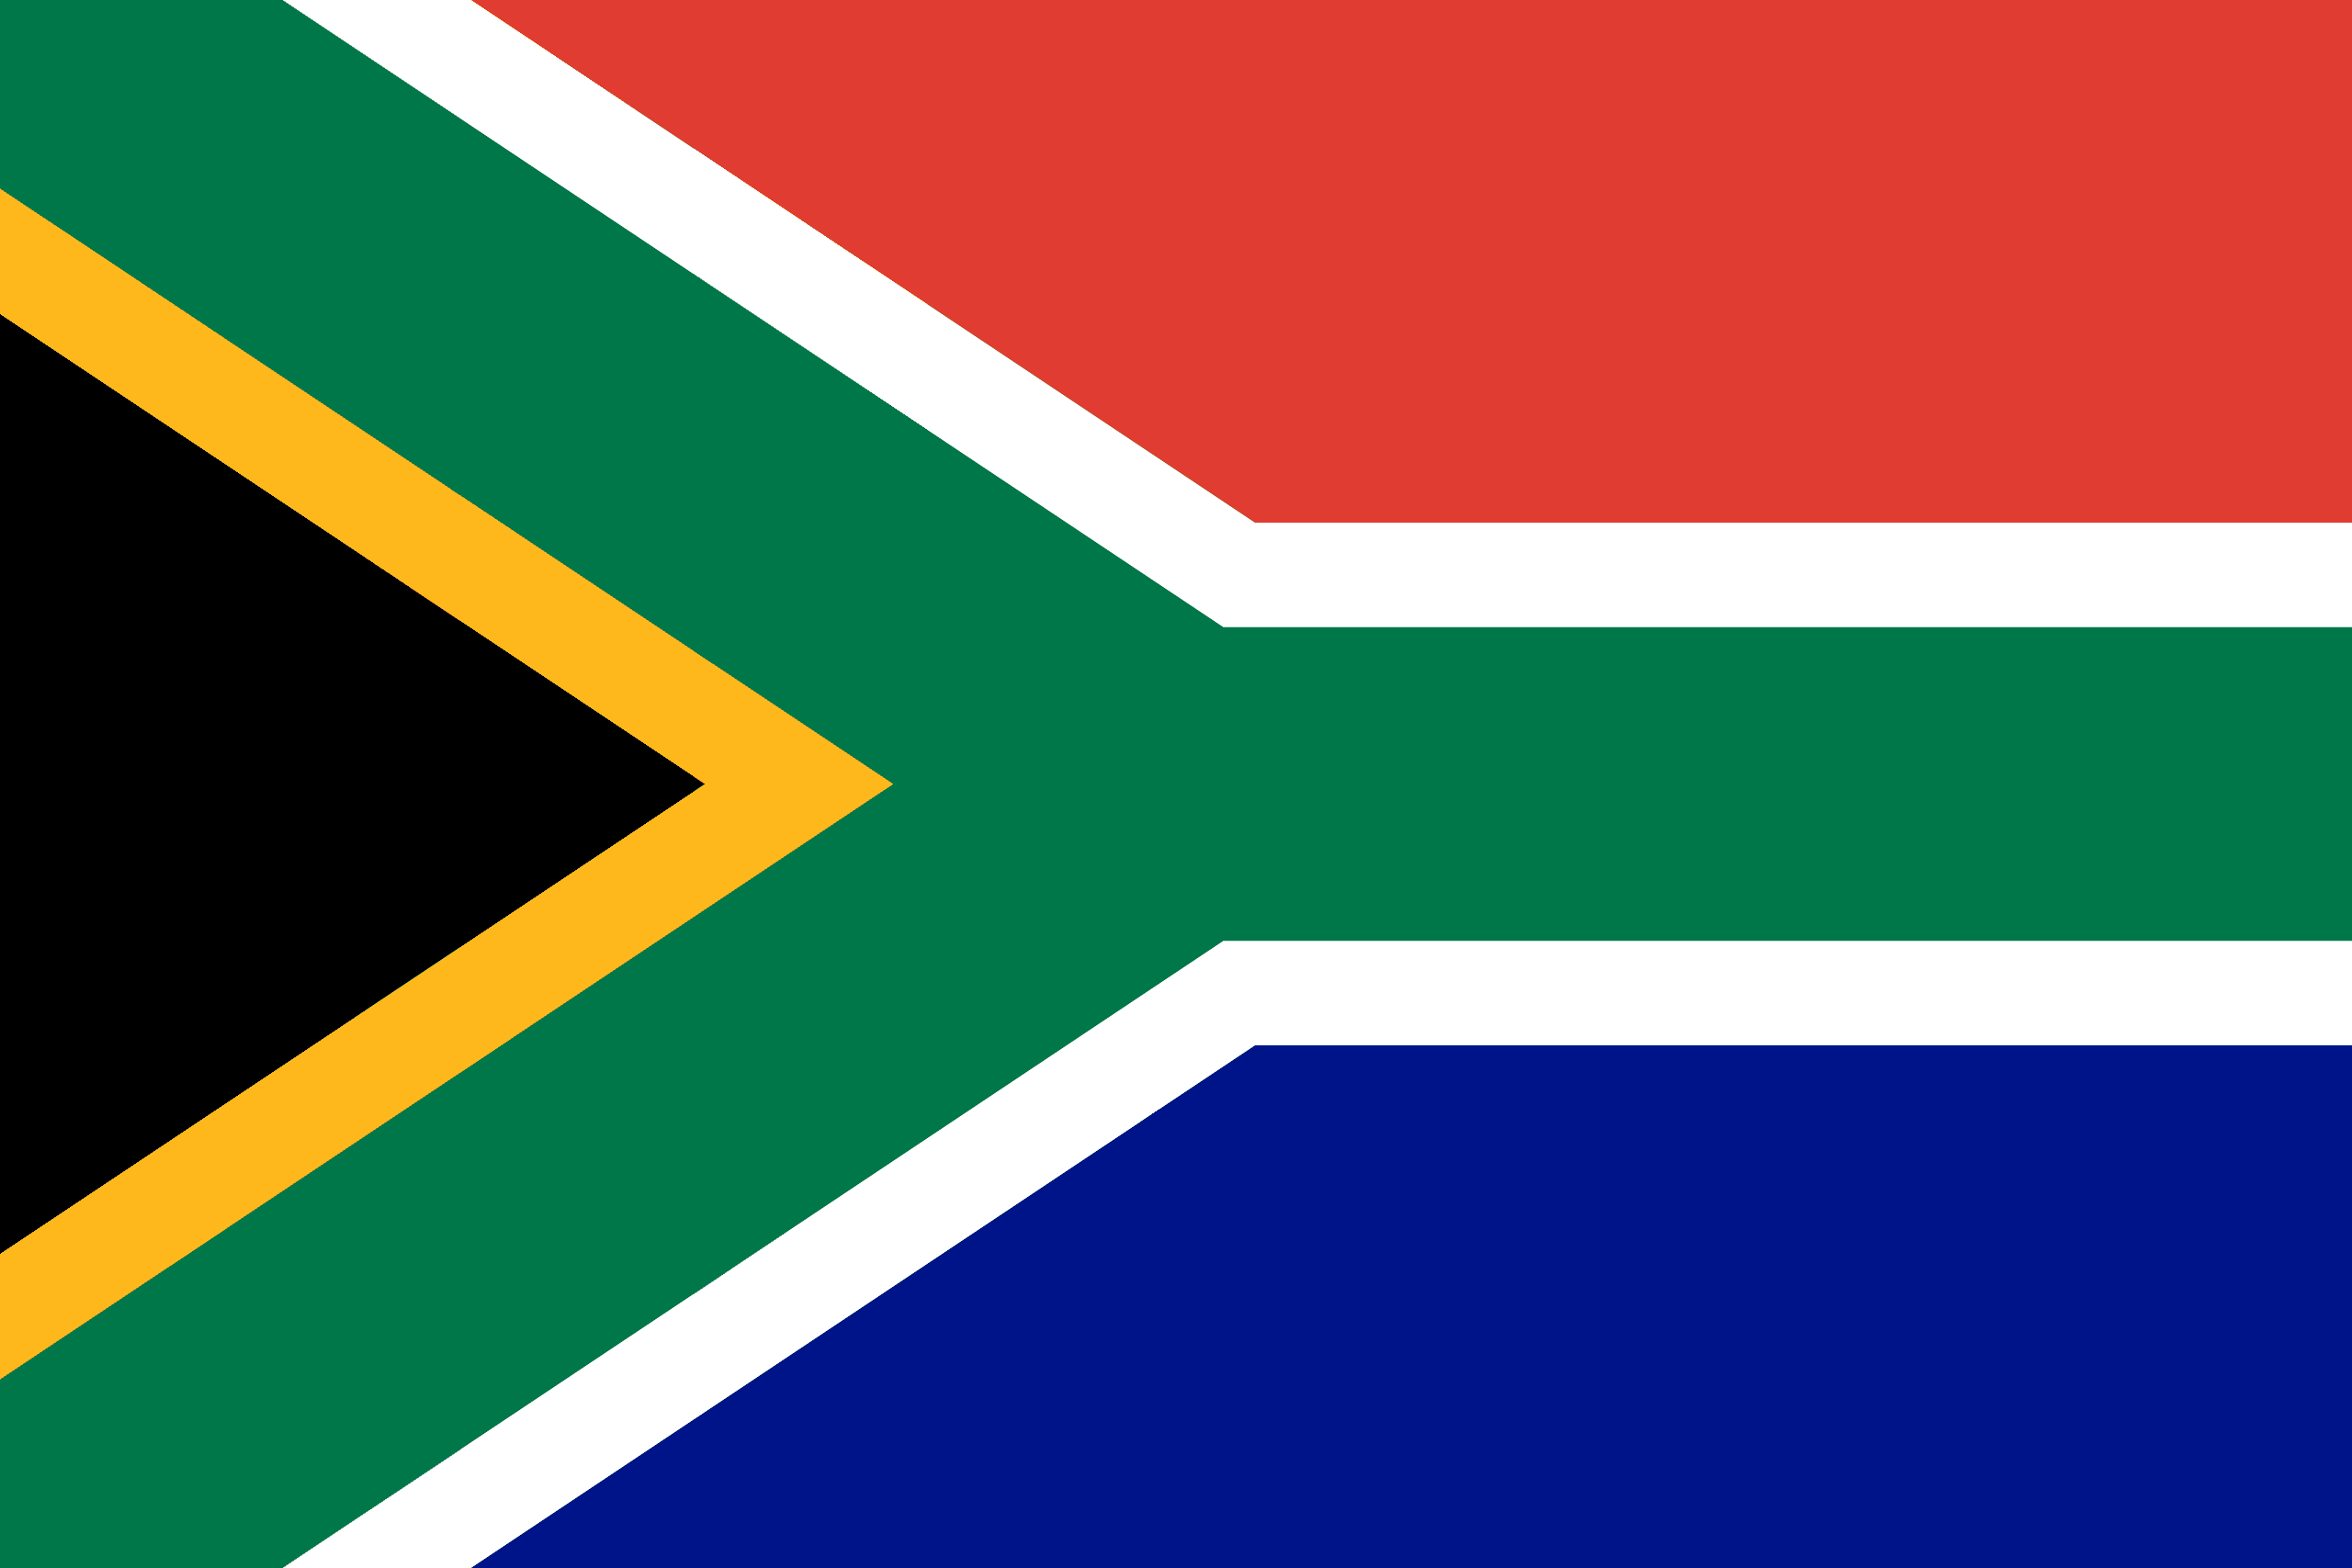 Flag of South Africa 🇿🇦, image & brief history of the flag